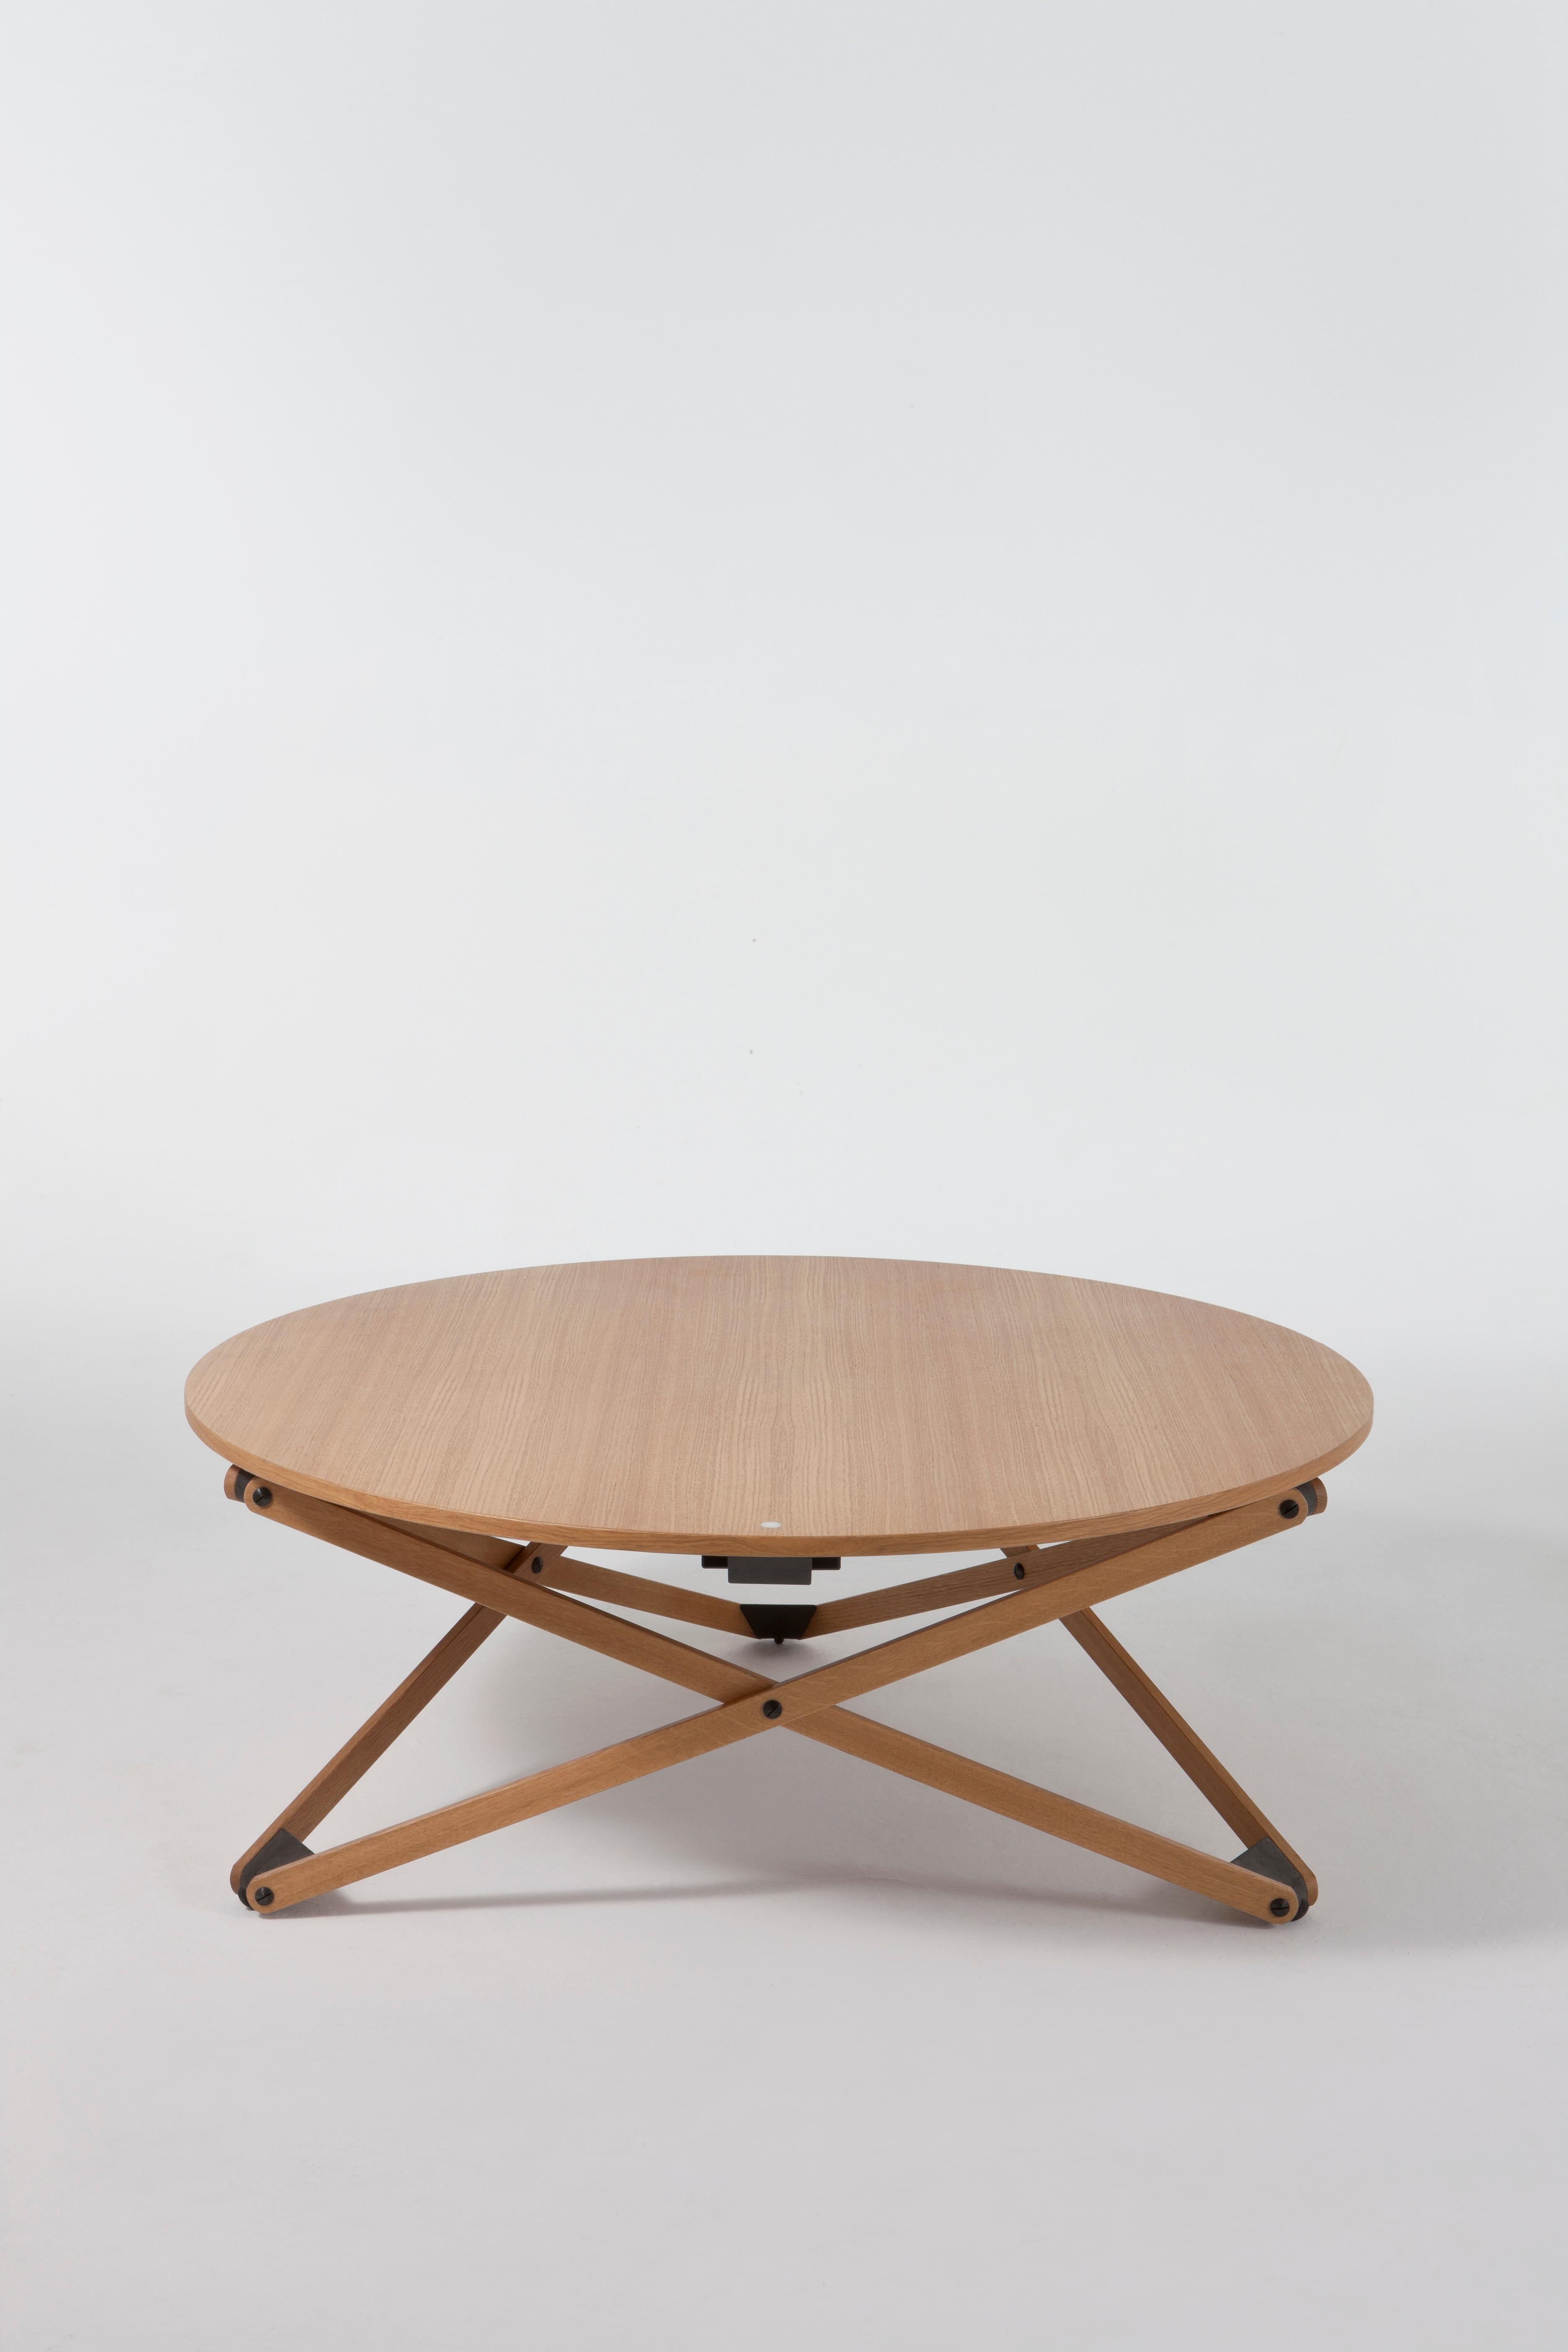 Subeybaja oak table by Robert Heritage, Roger Webb.
Dimensions: D 100 x H 39-72 cm
Materials: Oak.
Available in natural or black oak.

The Subeybaja is height-adjustable to seven different positions, making it a highly versatile solution. Its